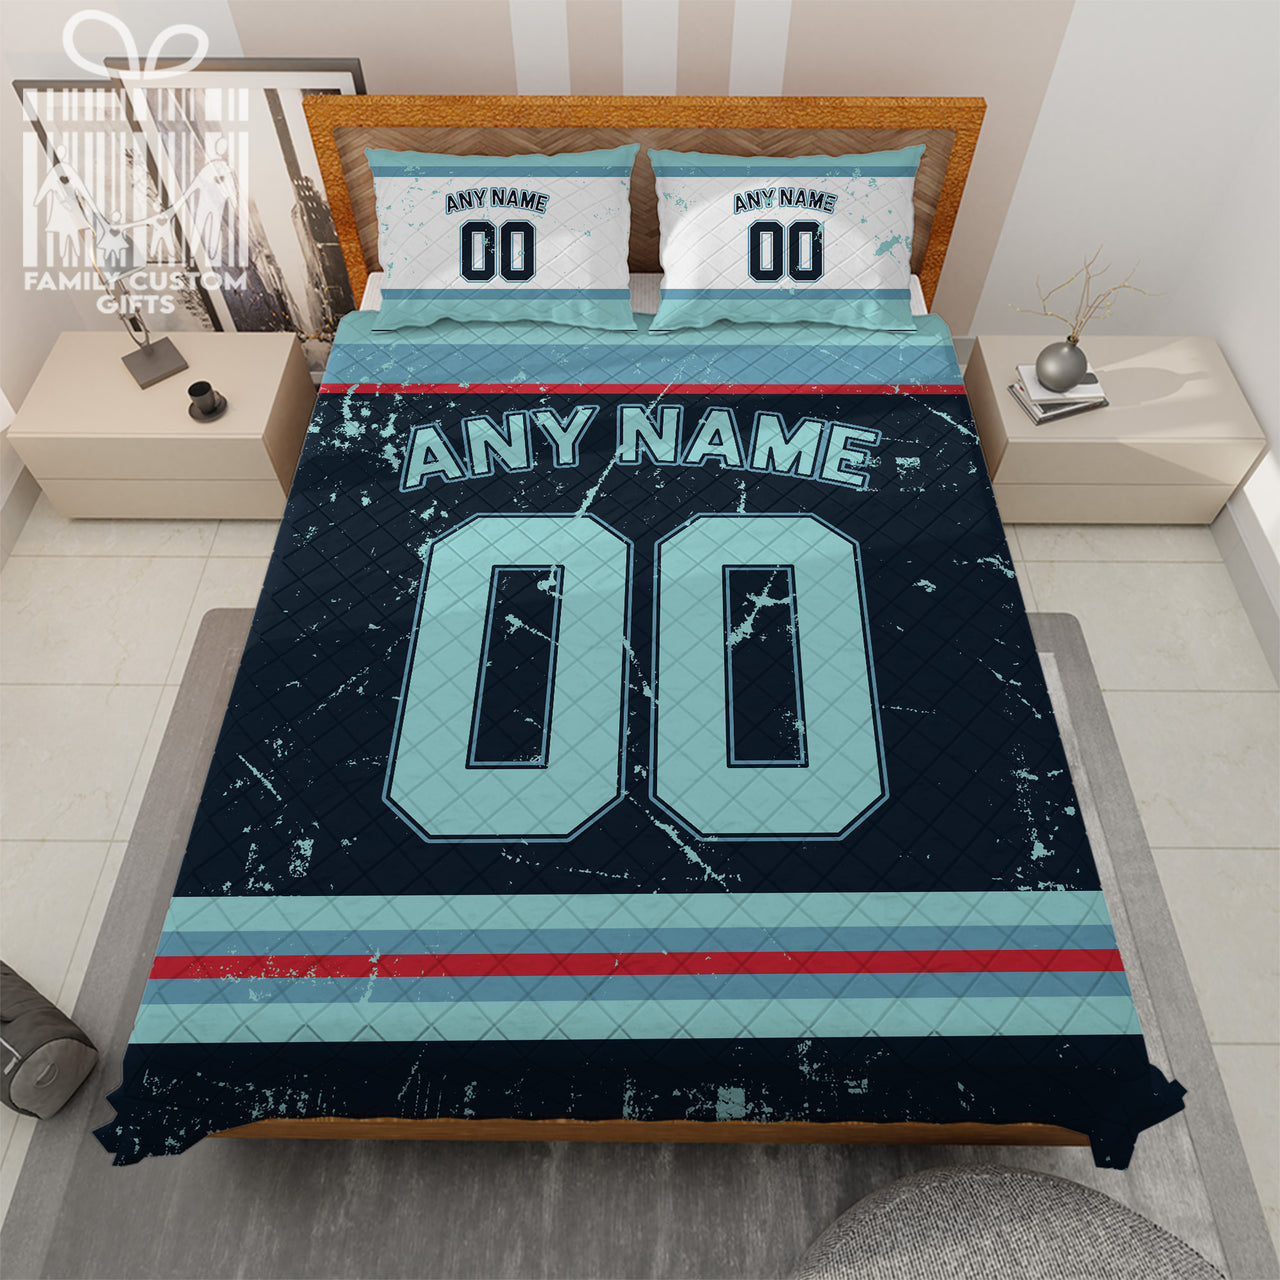 Custom Quilt Sets Seattle Jersey Personalized Ice hockey Premium Quilt Bedding for Men Women